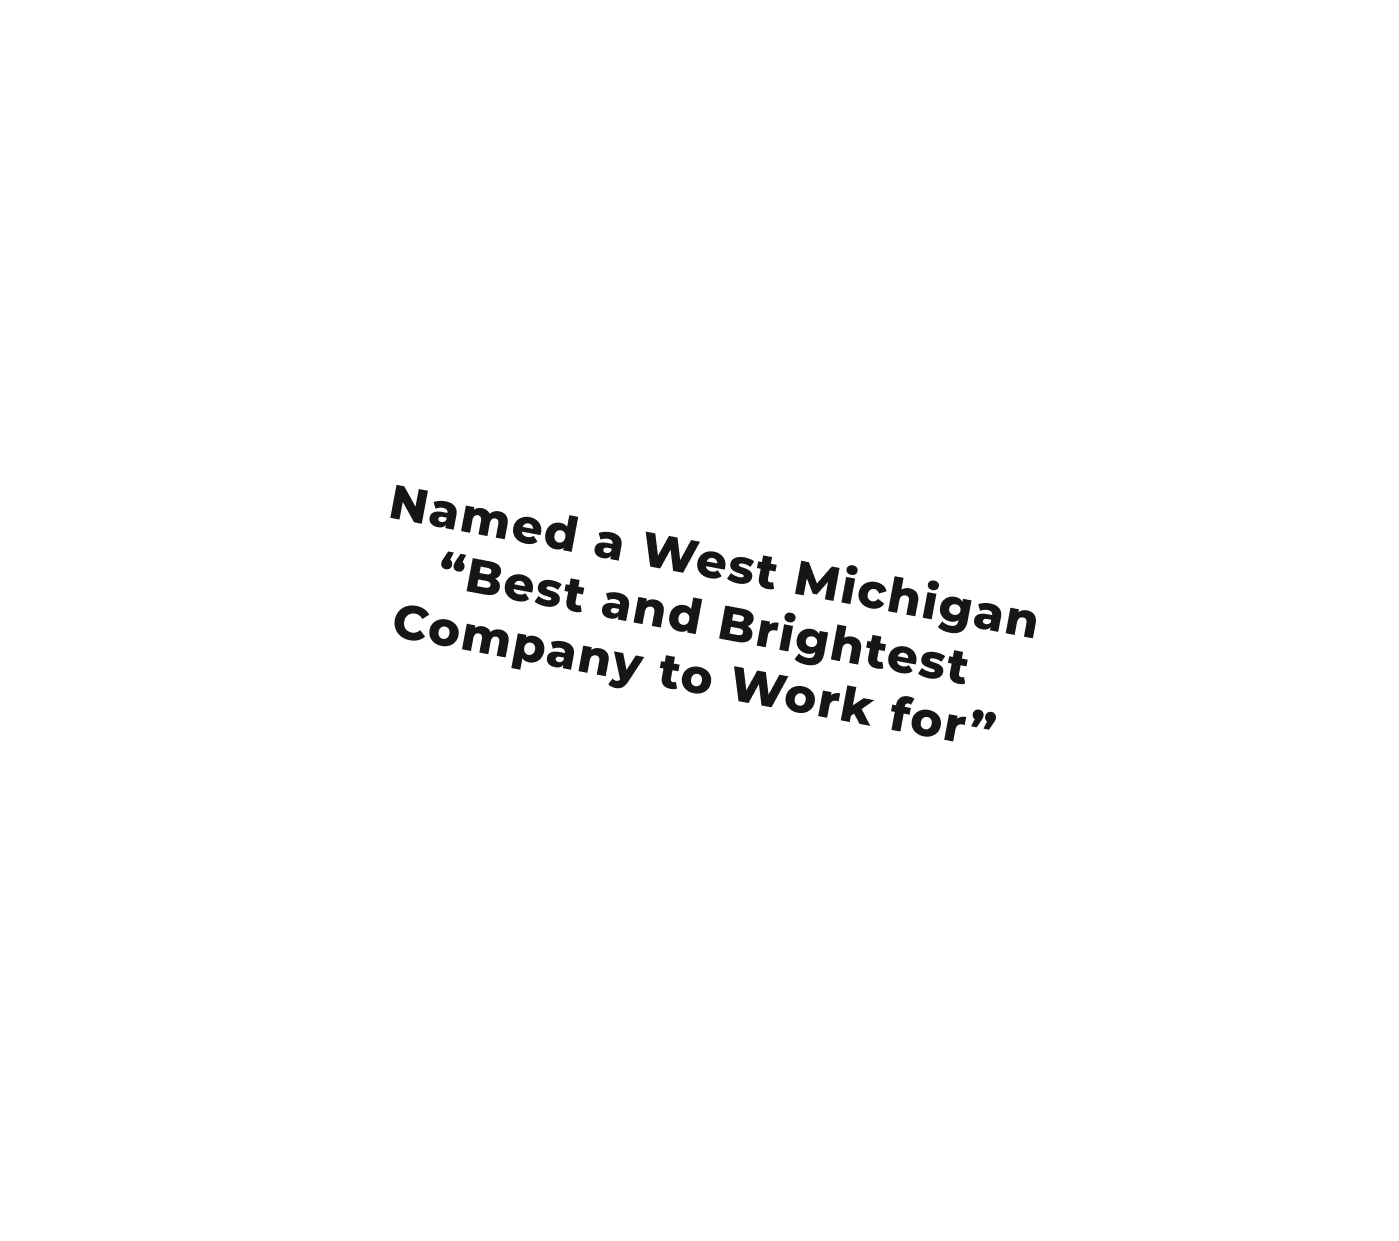 Named a West Michigan 'Best and Brightest Company to Work for"